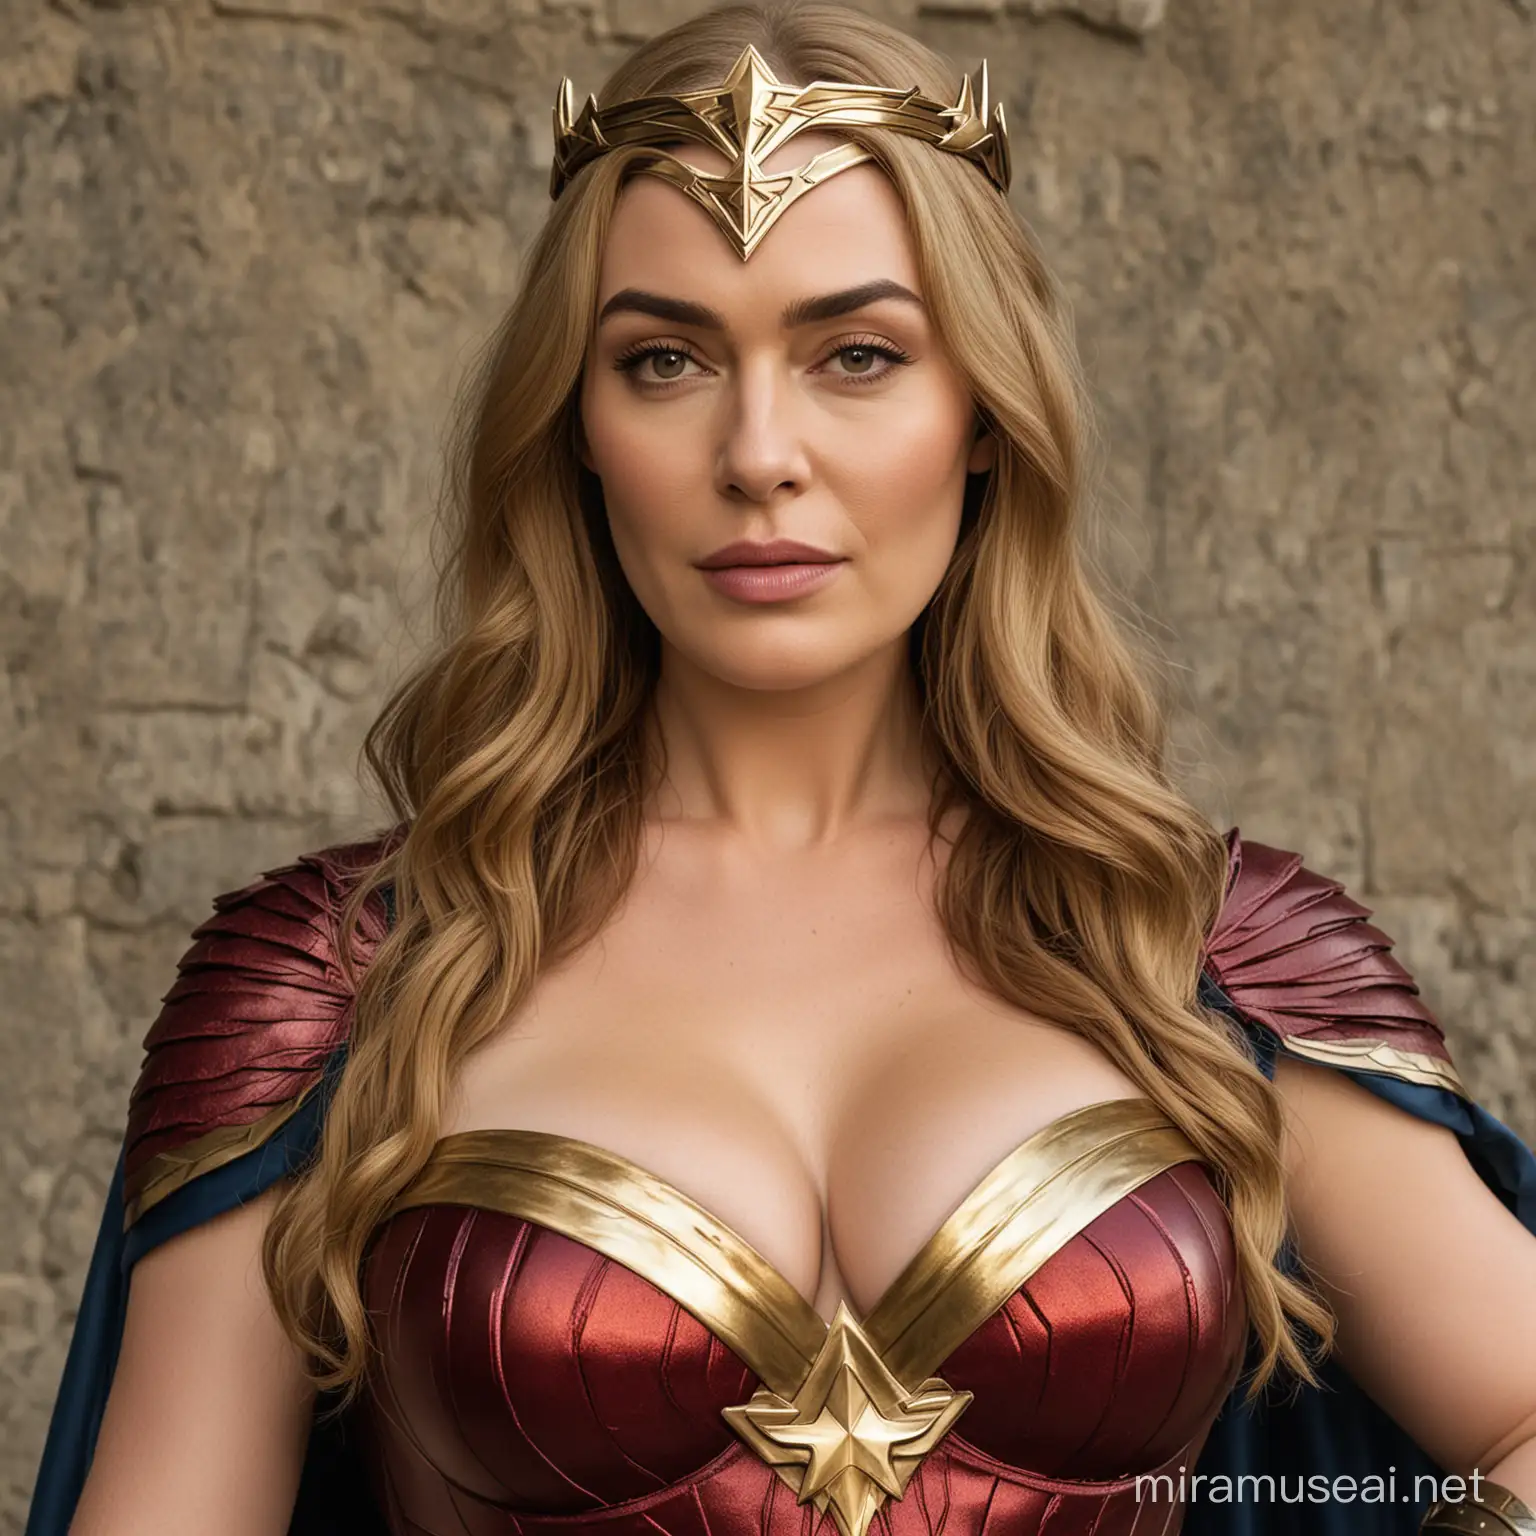 Cersei Lannister as Wonder Woman Bold Cosplay with Empowering Curves